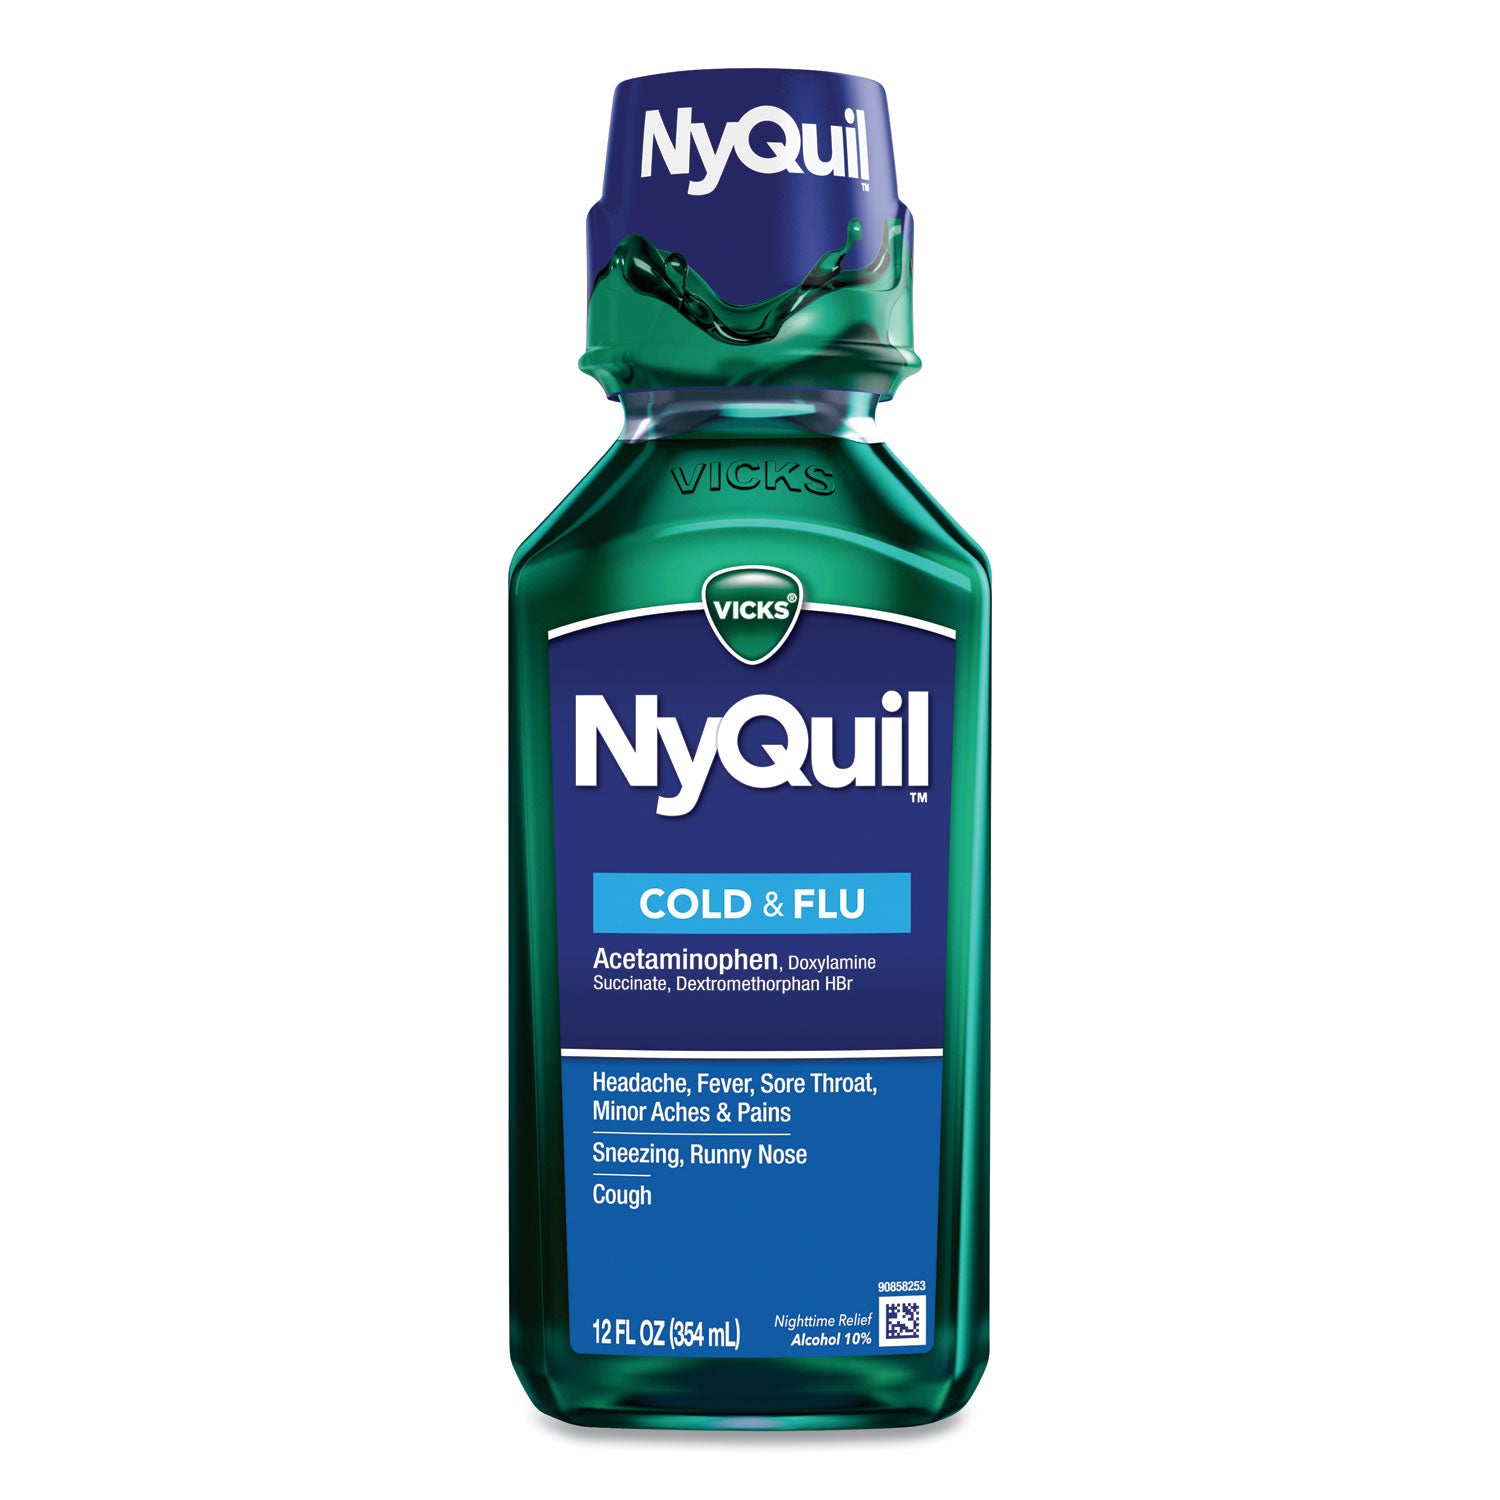 nyquil-cold-and-flu-nighttime-liquid-12-oz-bottle-12-carton_pgc01426 - 1